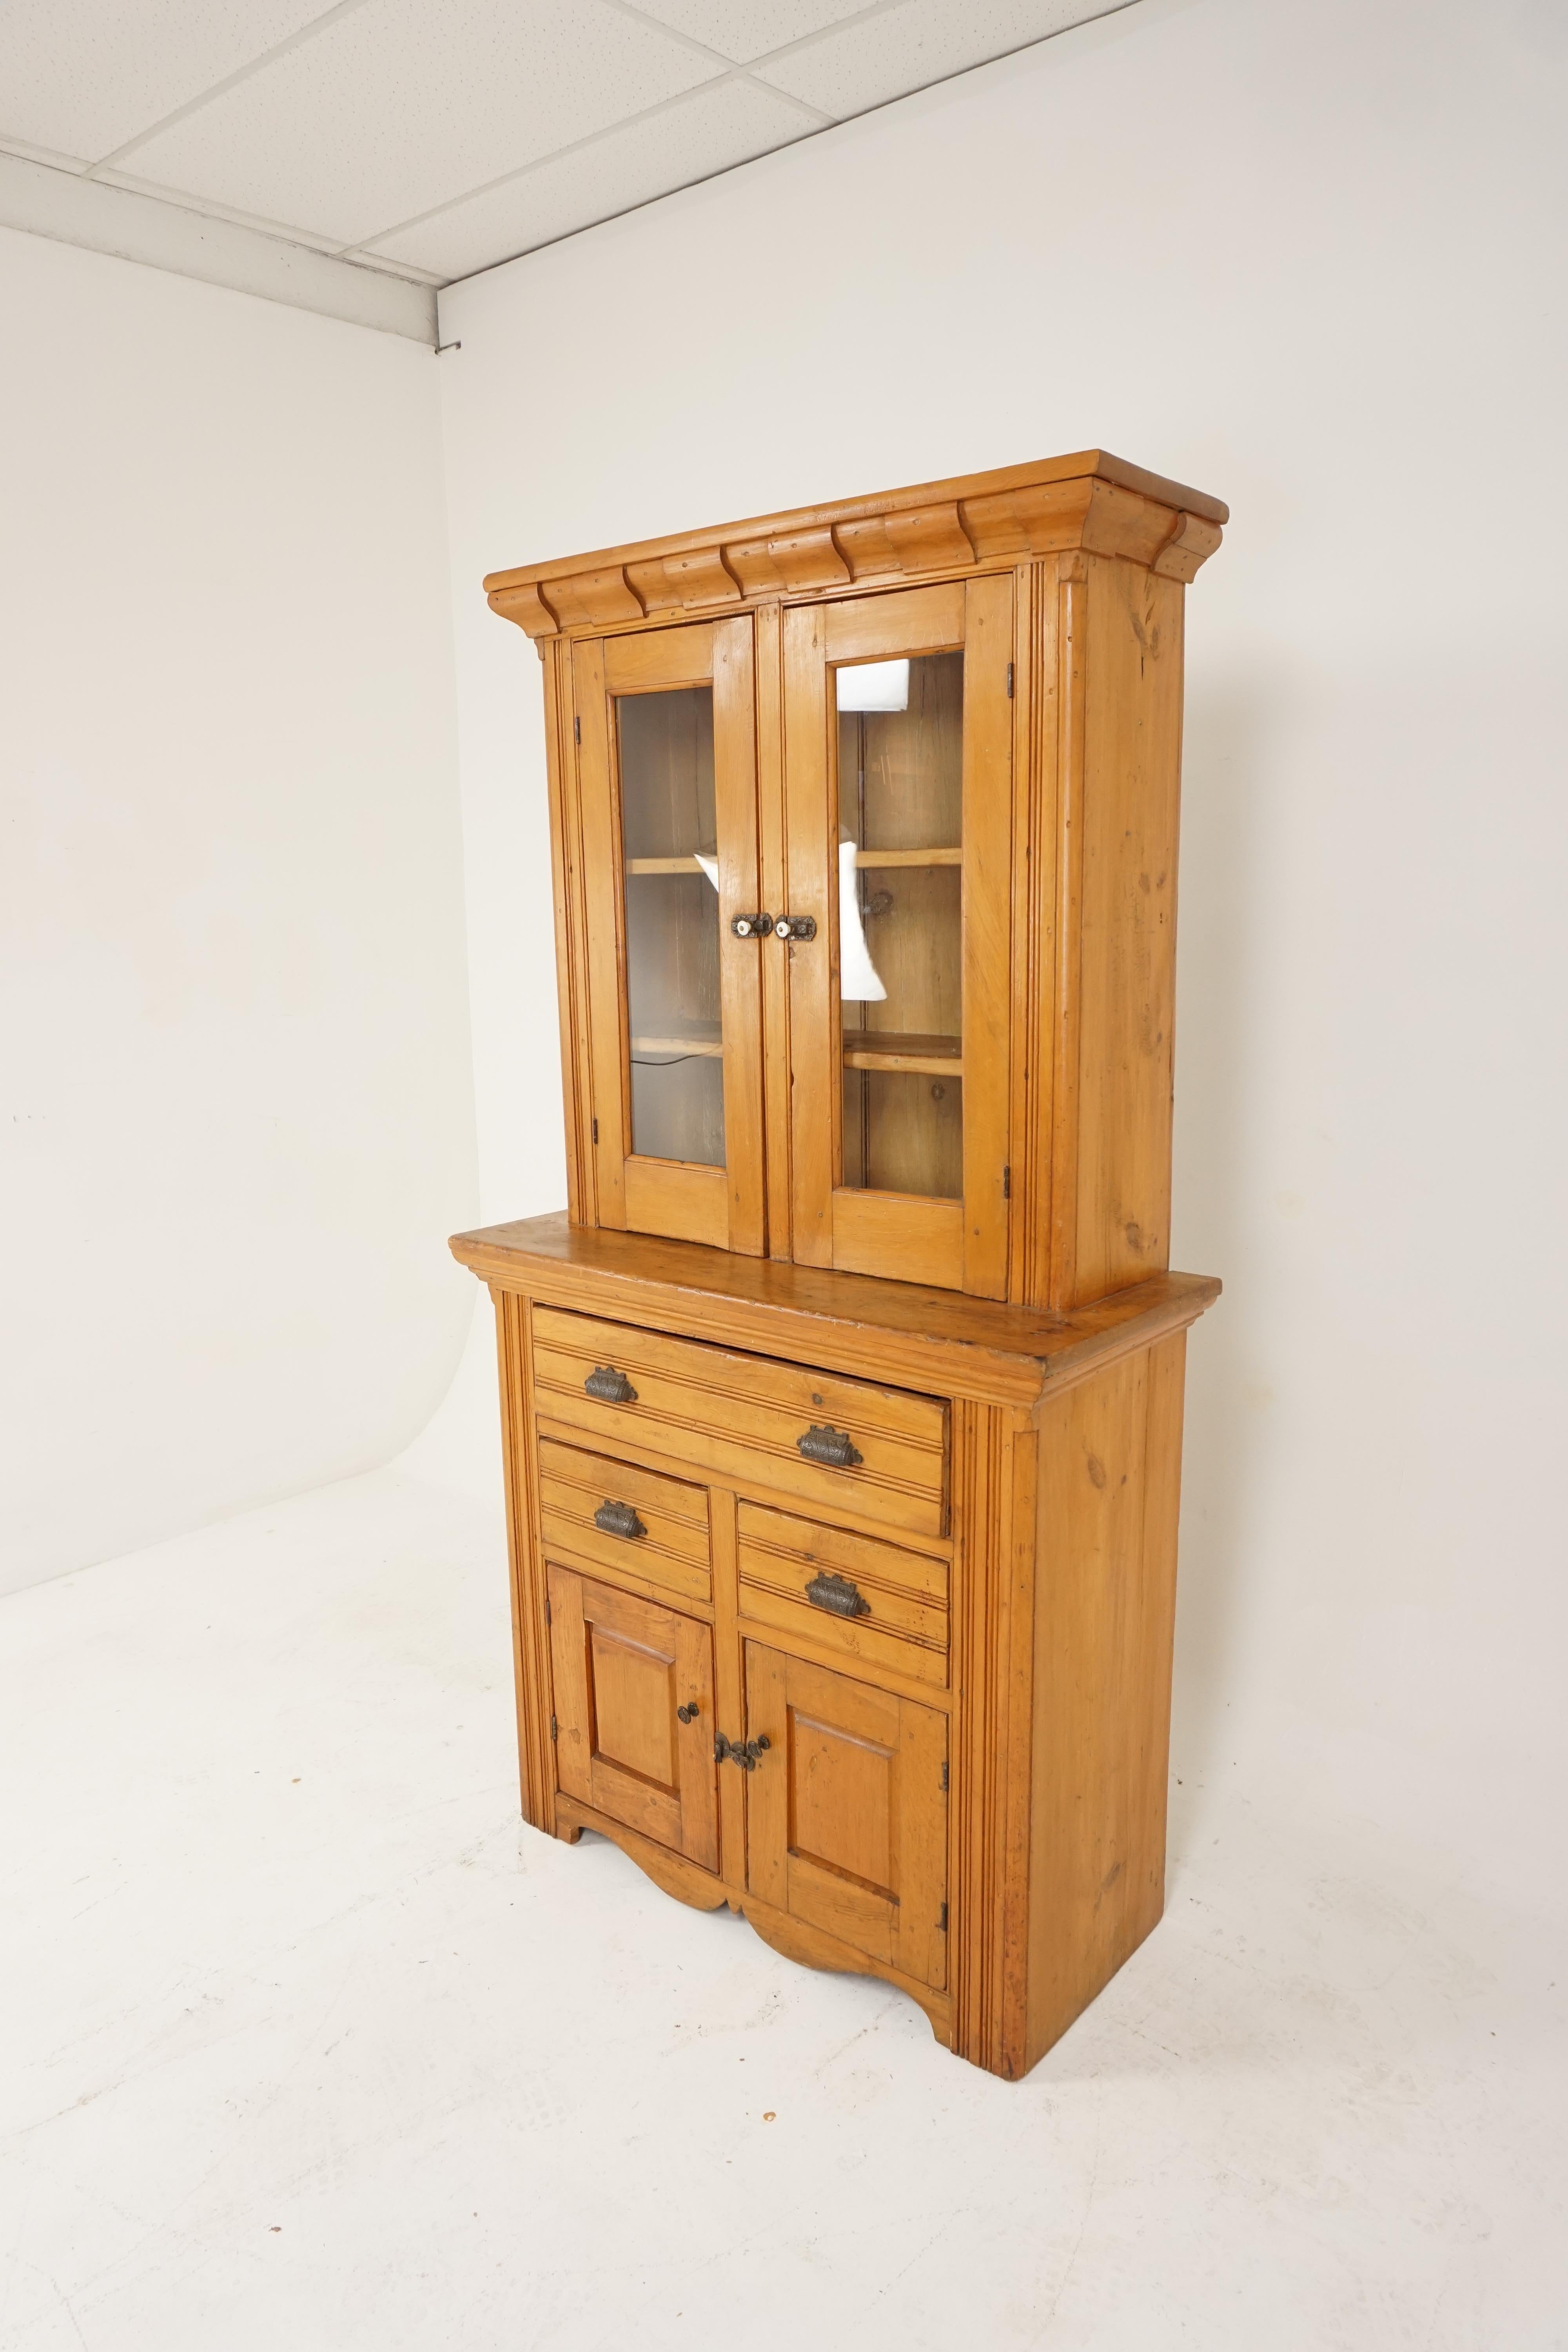 Antique 19th century pine buffet hutch, Pantry Farmhouse, Canada 1870, H326

Canada 1870
Solid pine
Original finish
Large shaped cornice on top
Pair of glass doors open to reveal tow fixed shelves
Original hardware on doors
Lower section has a full